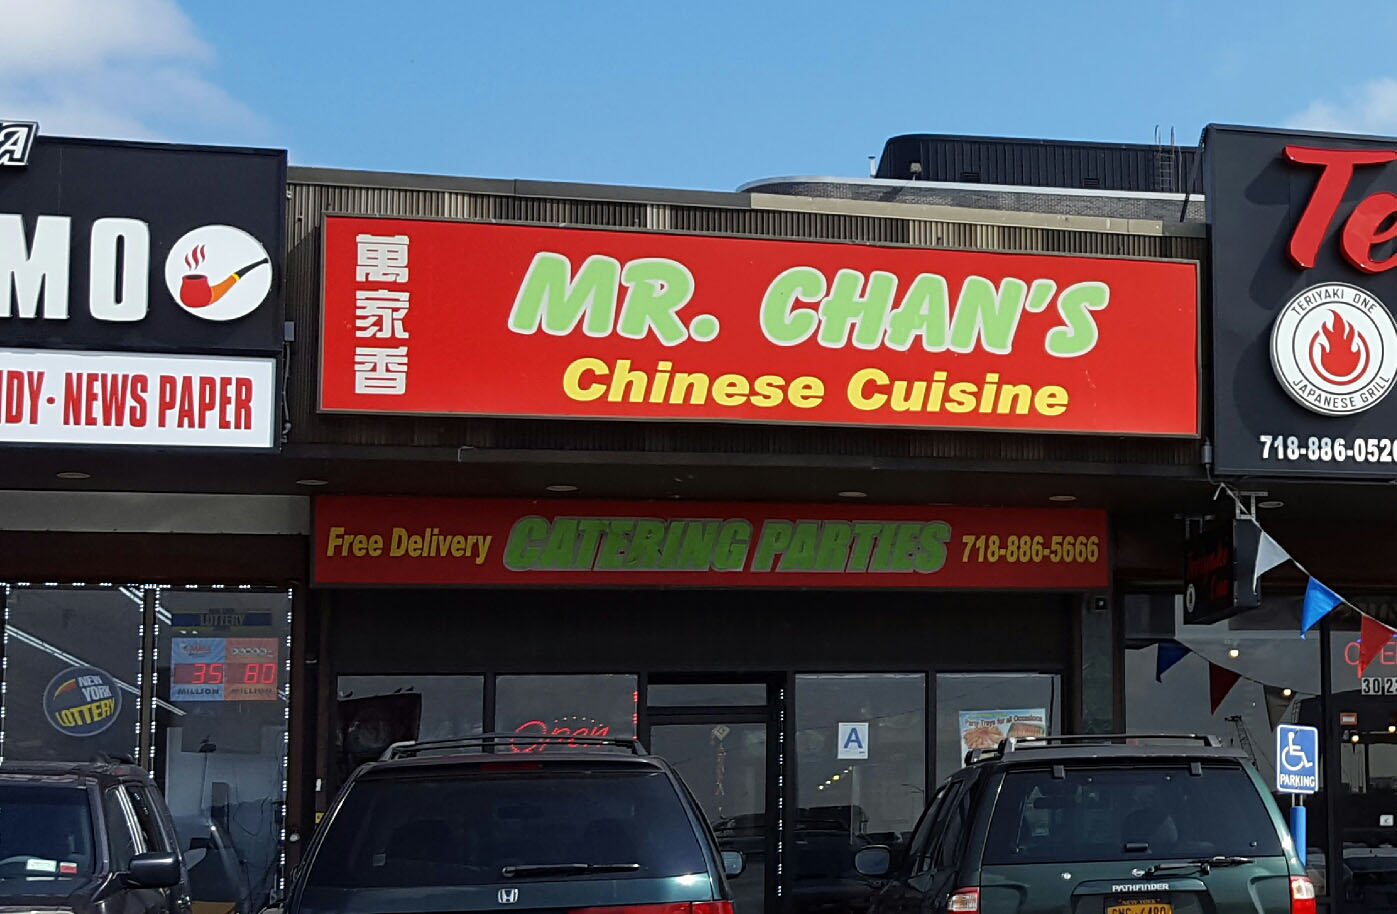 Mr. Chan's Chinese Cuisine